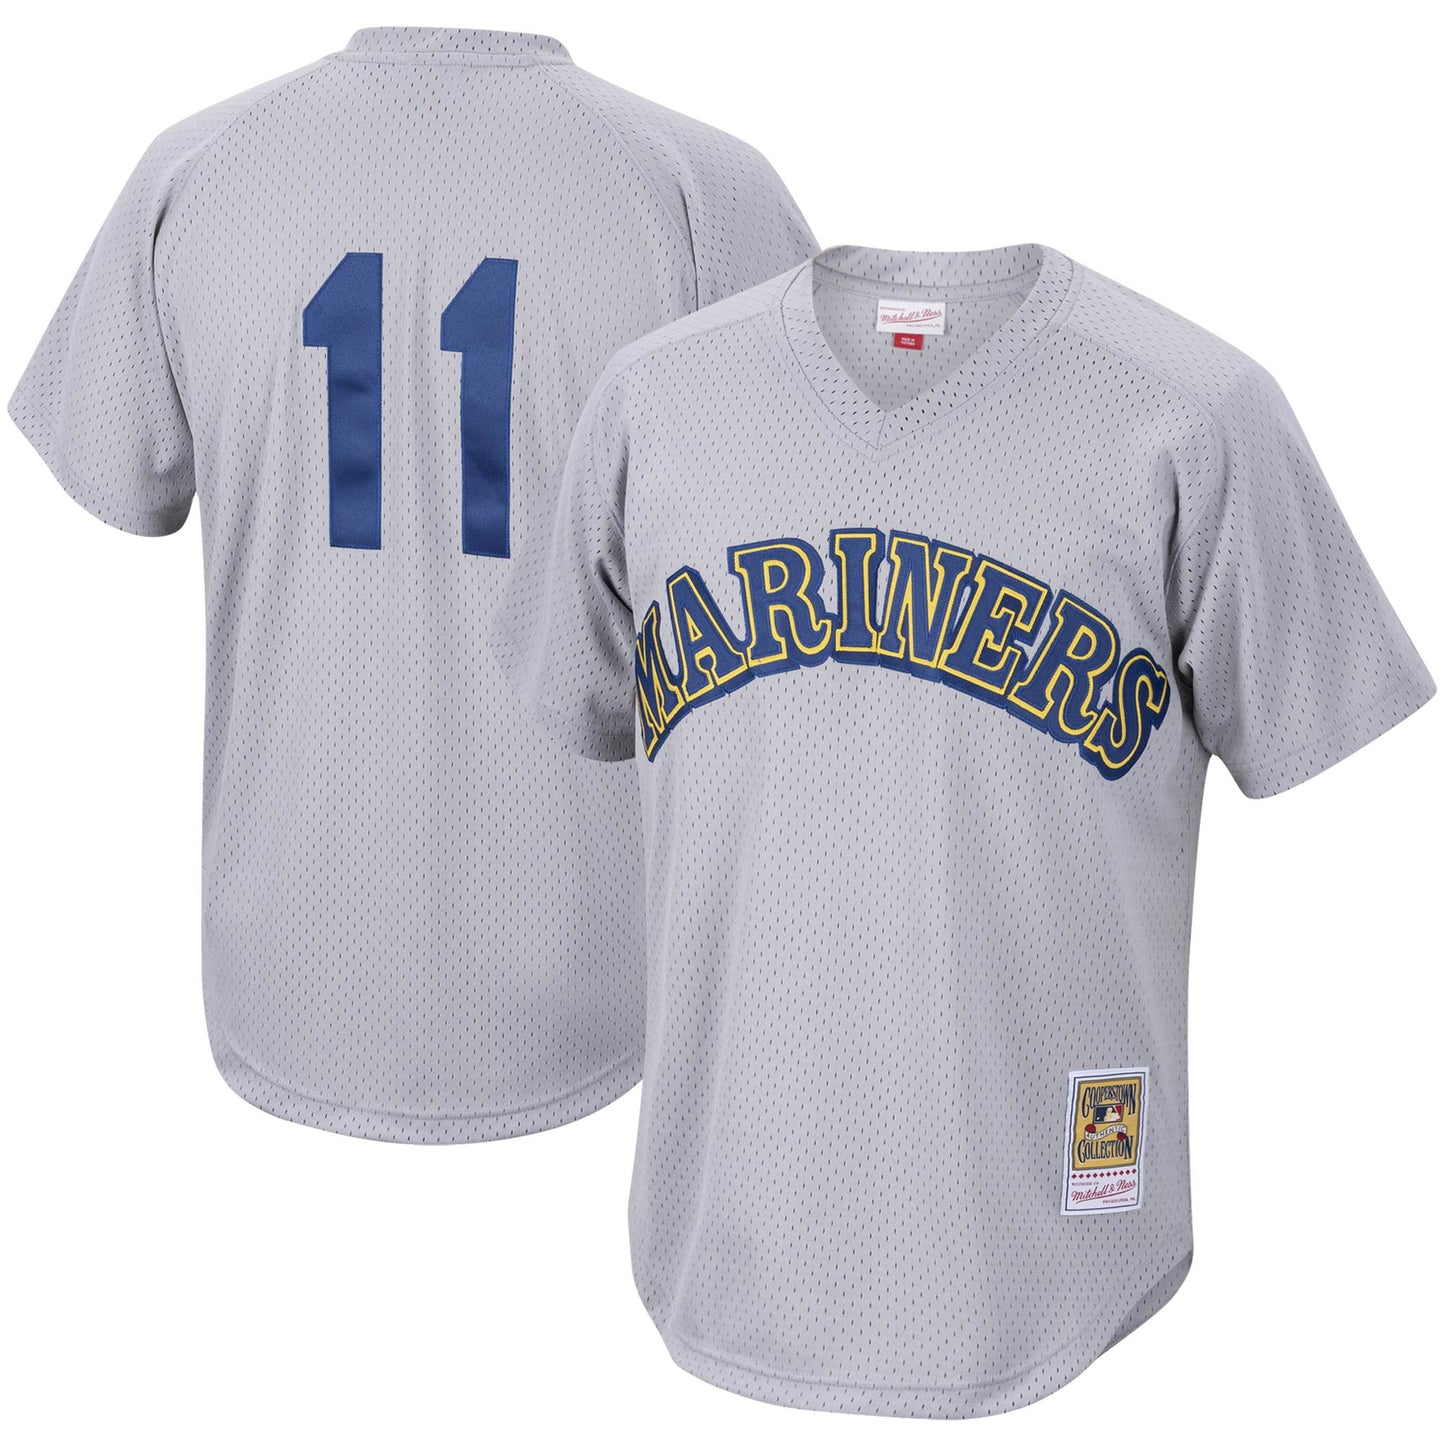 Edgar Martinez Seattle Mariners Mitchell & Ness Cooperstown Collection Mesh Batting Practice Jersey - Charcoal